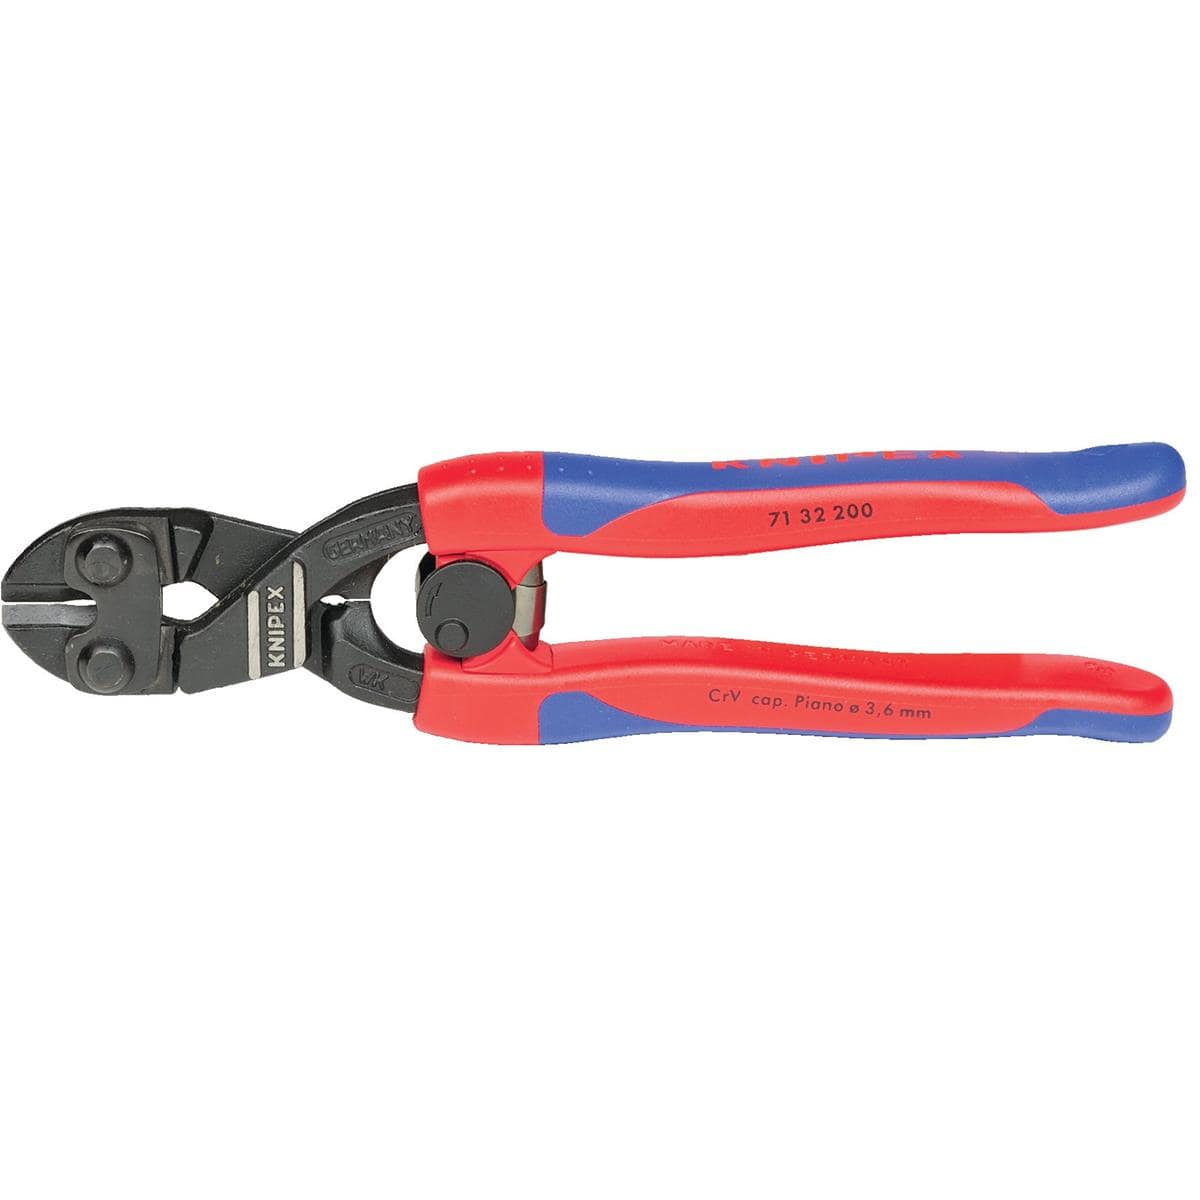 Knipex Compact Fence Cutter